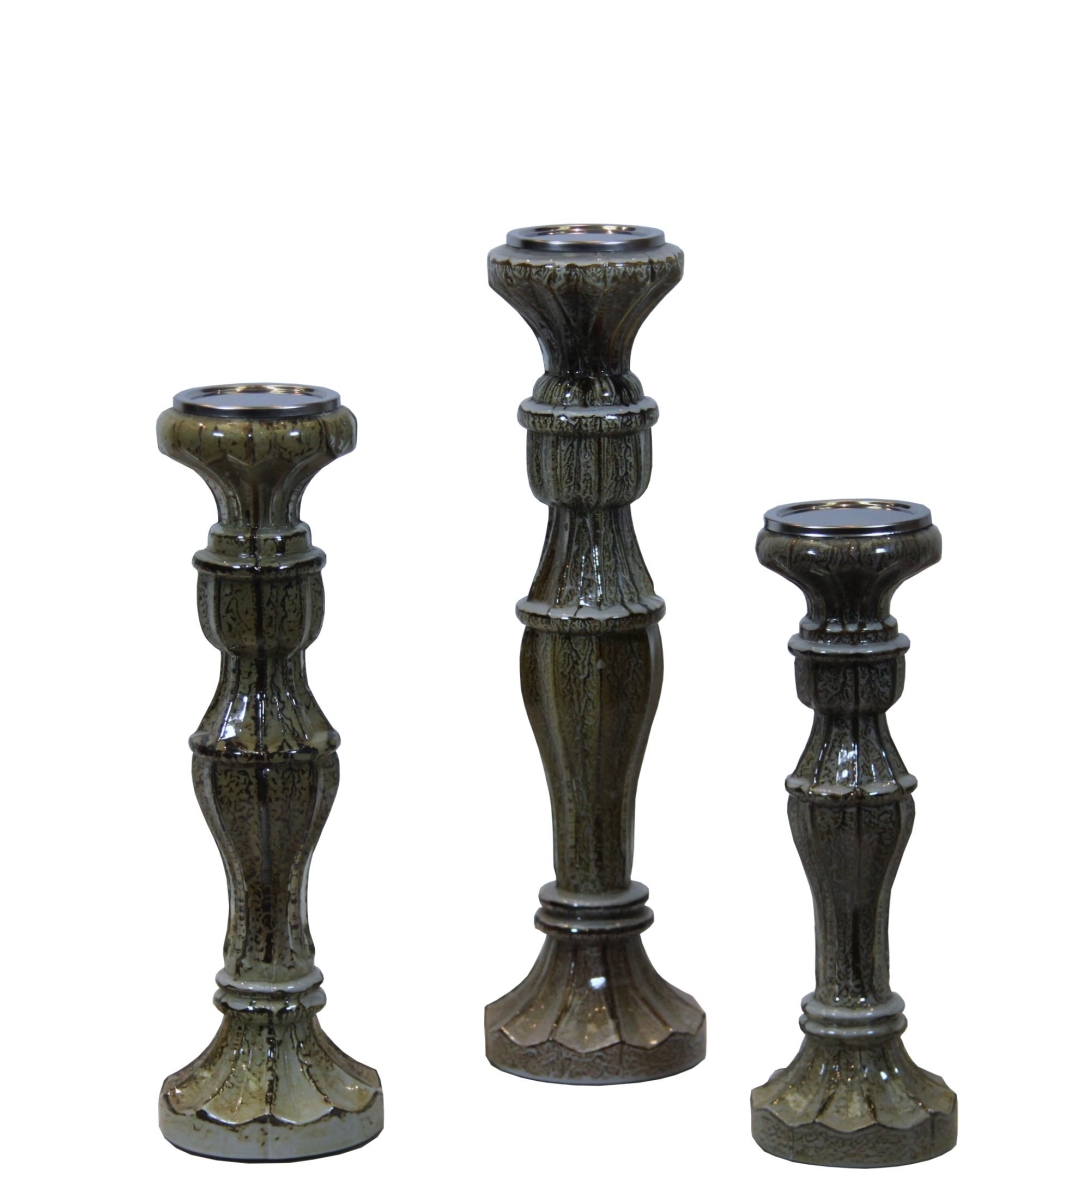 55038 Distressed Candle Holders, Grey - 3 Piece